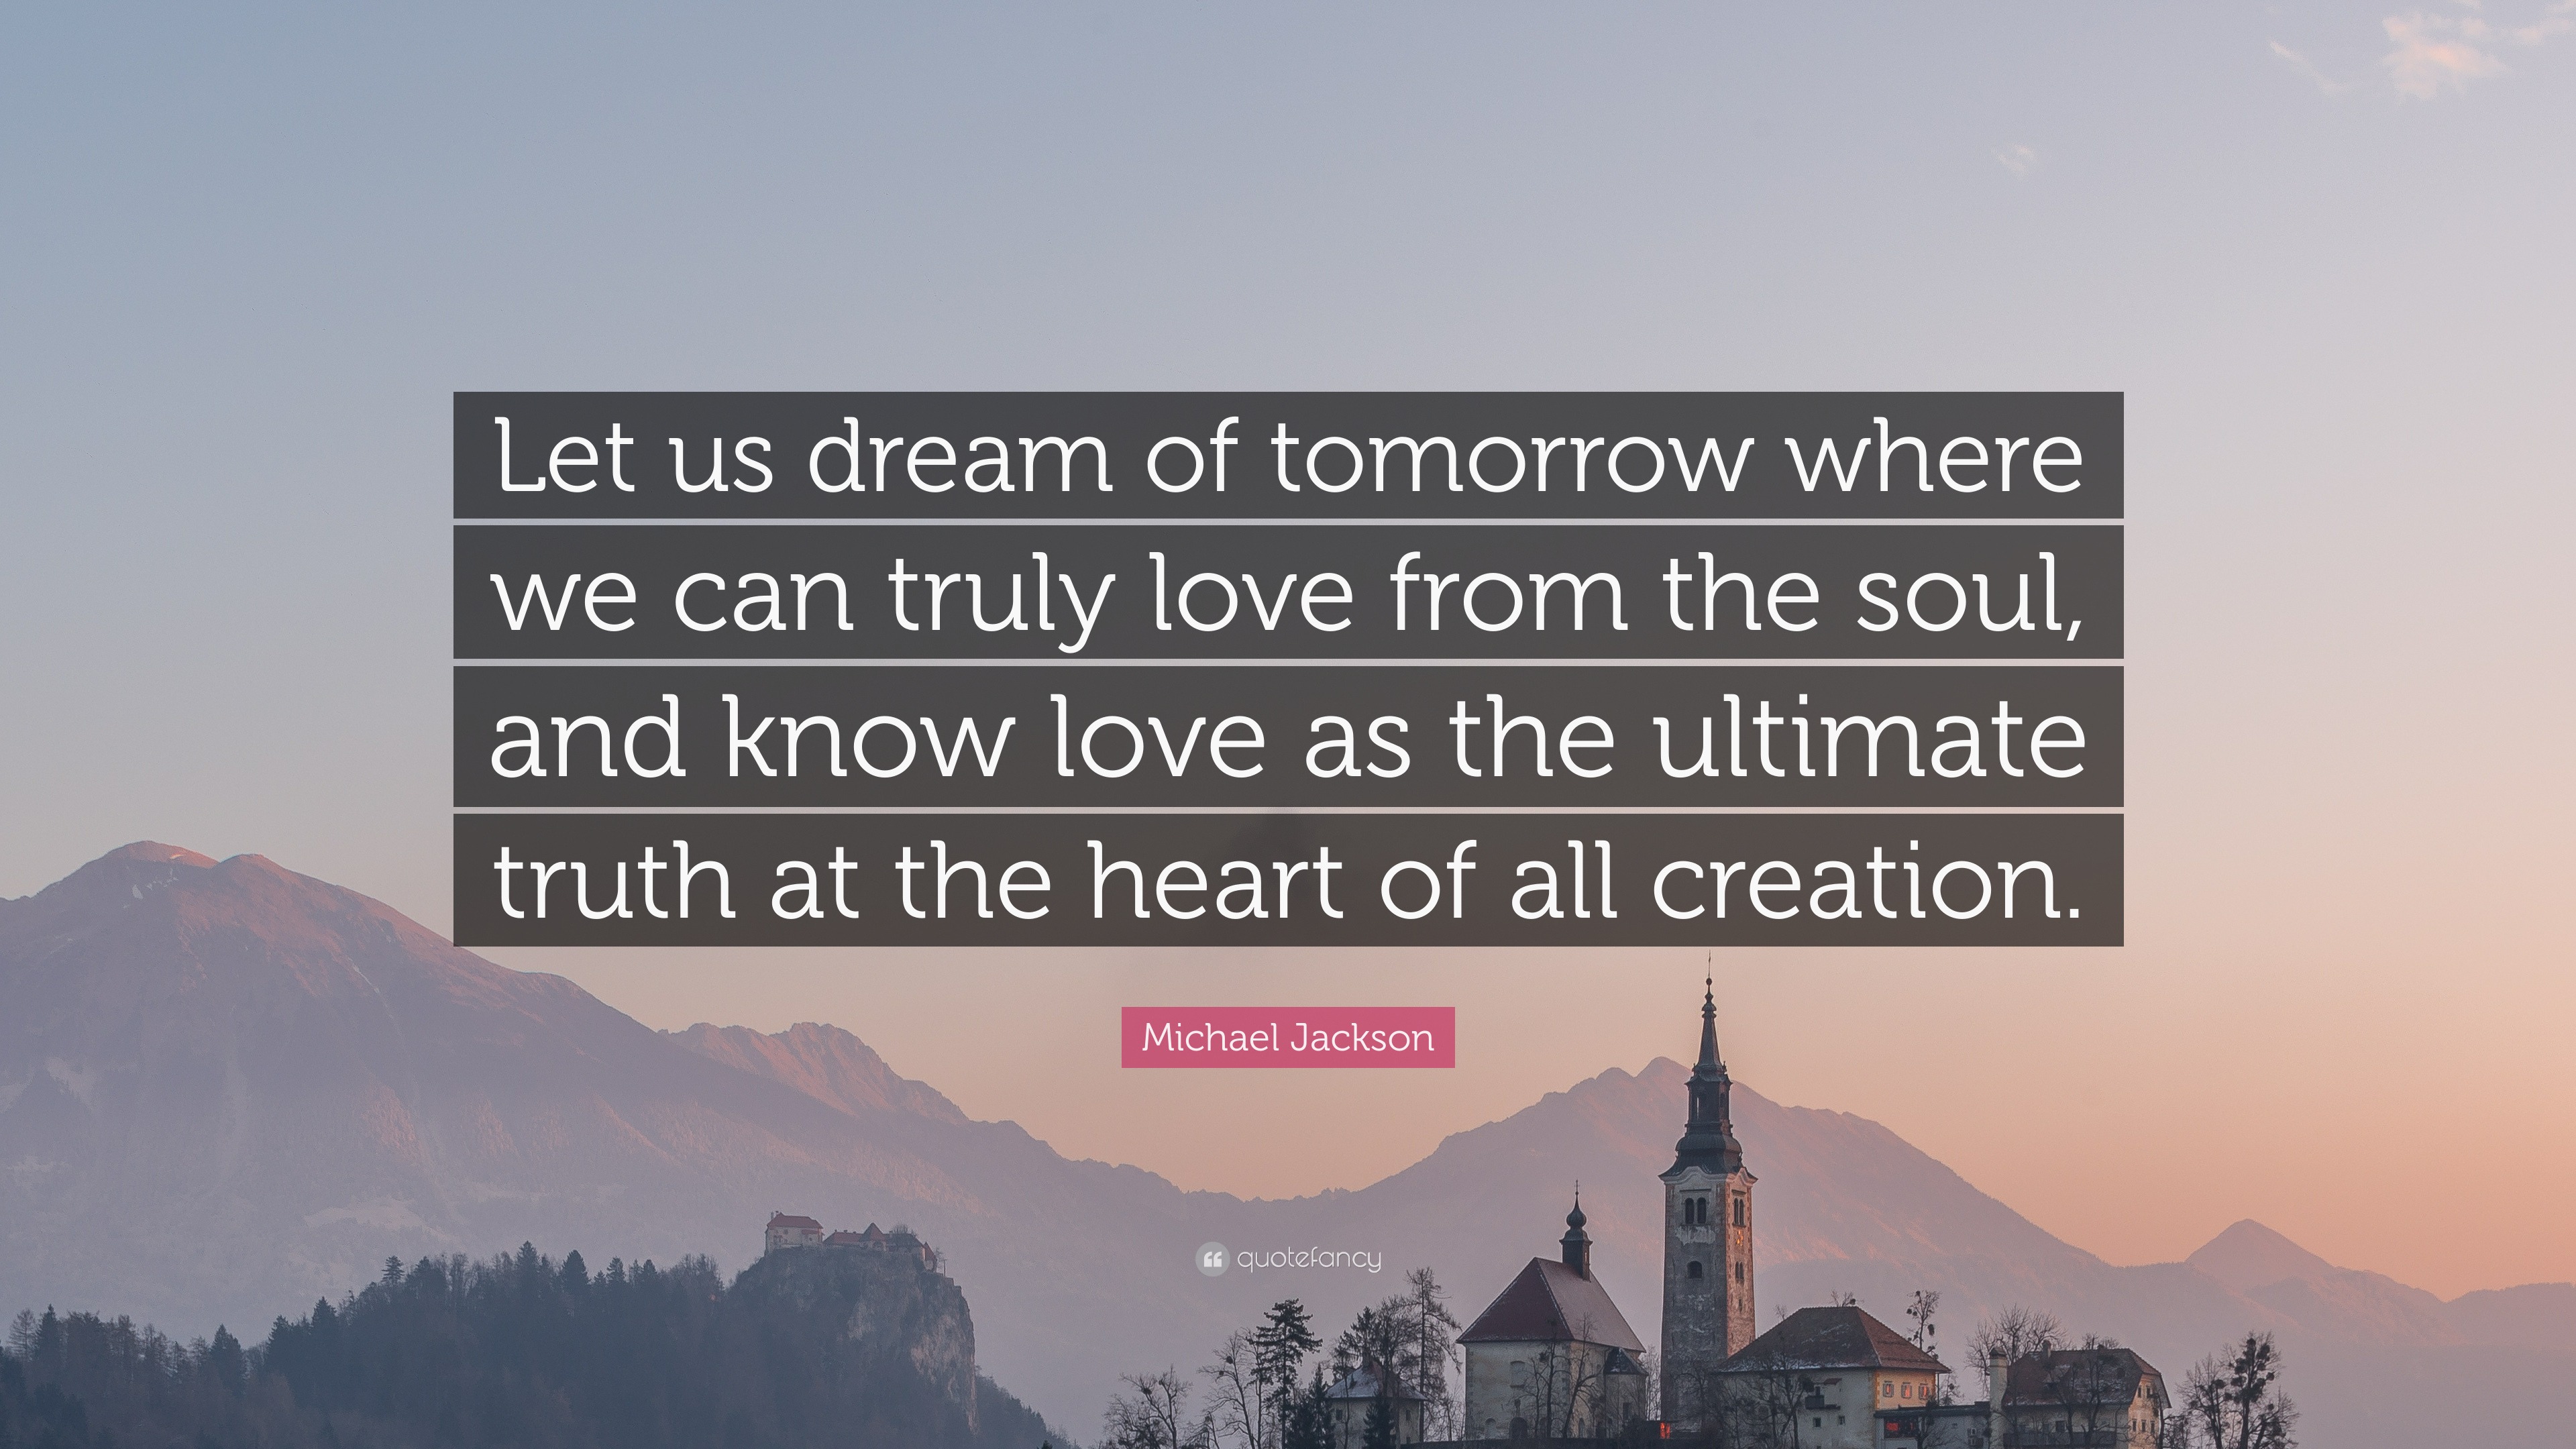 Michael Jackson Quote: “Let us dream of tomorrow where we can truly ...